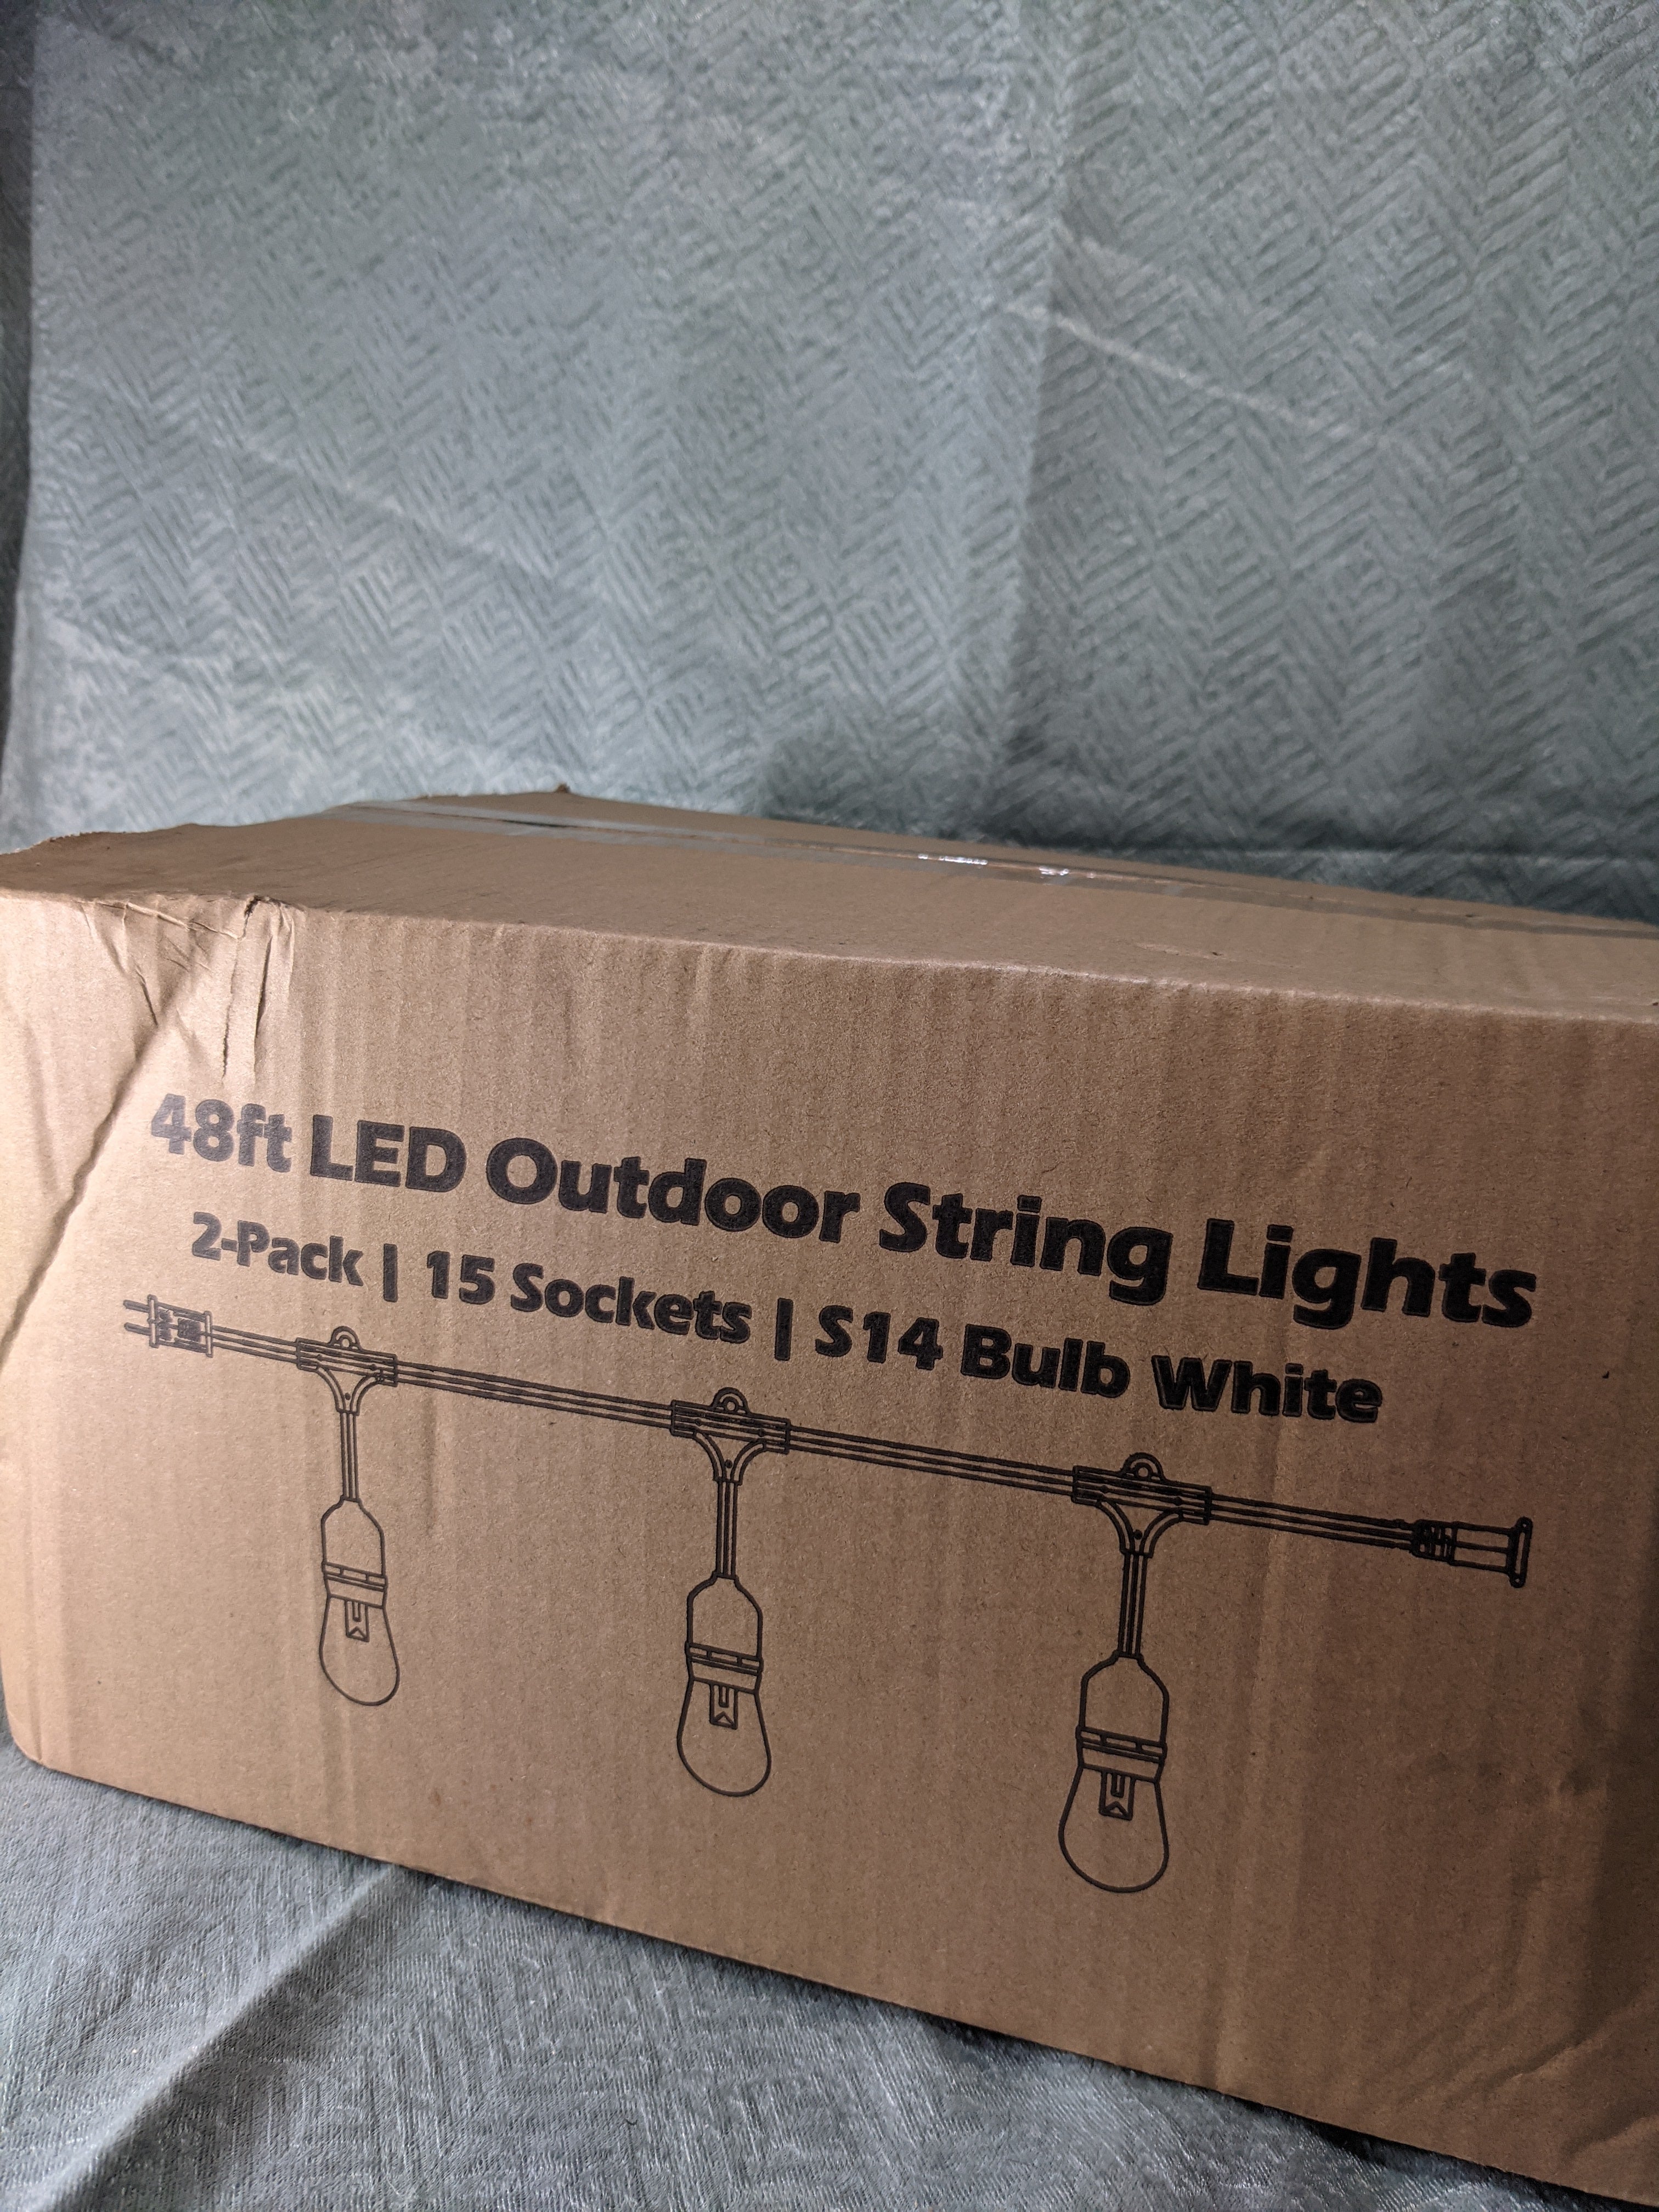 2 Pack 48FT LED Dimmable Outdoor String Lights, Patio String Lights Waterproof, Commercial Grade&Shatterproof, 2700K, White Cords, 15 Hanging Sockets, 3 Spare Bulbs, for Backyard, Gazebo (Total 96FT) (7454264492270)